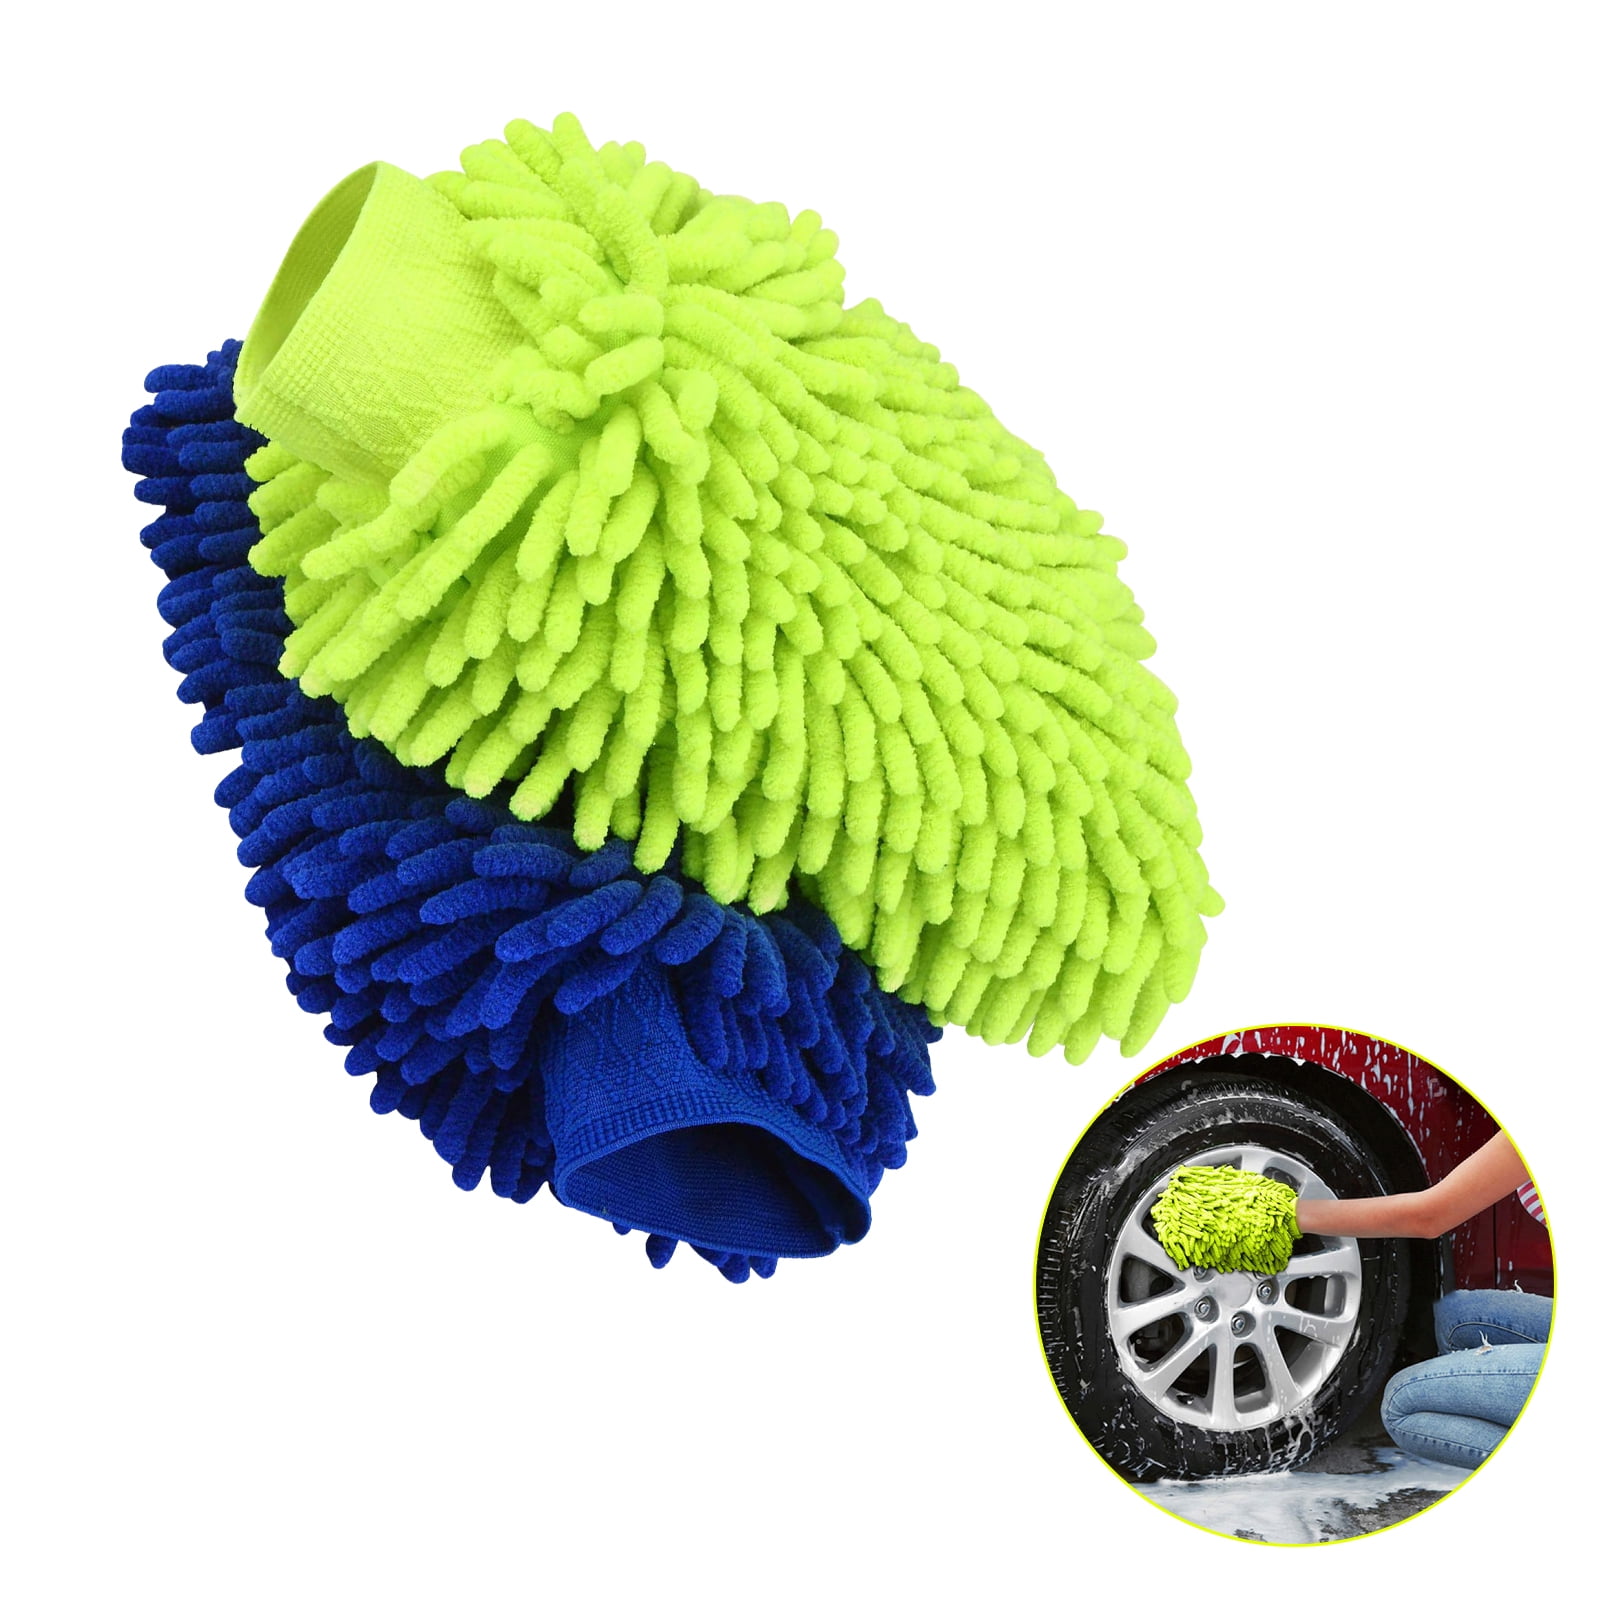 Details about   Microfiber Wash Mitt 8"x 5.75"  Multipurpose Cleaning Reusable Assorted Colors 